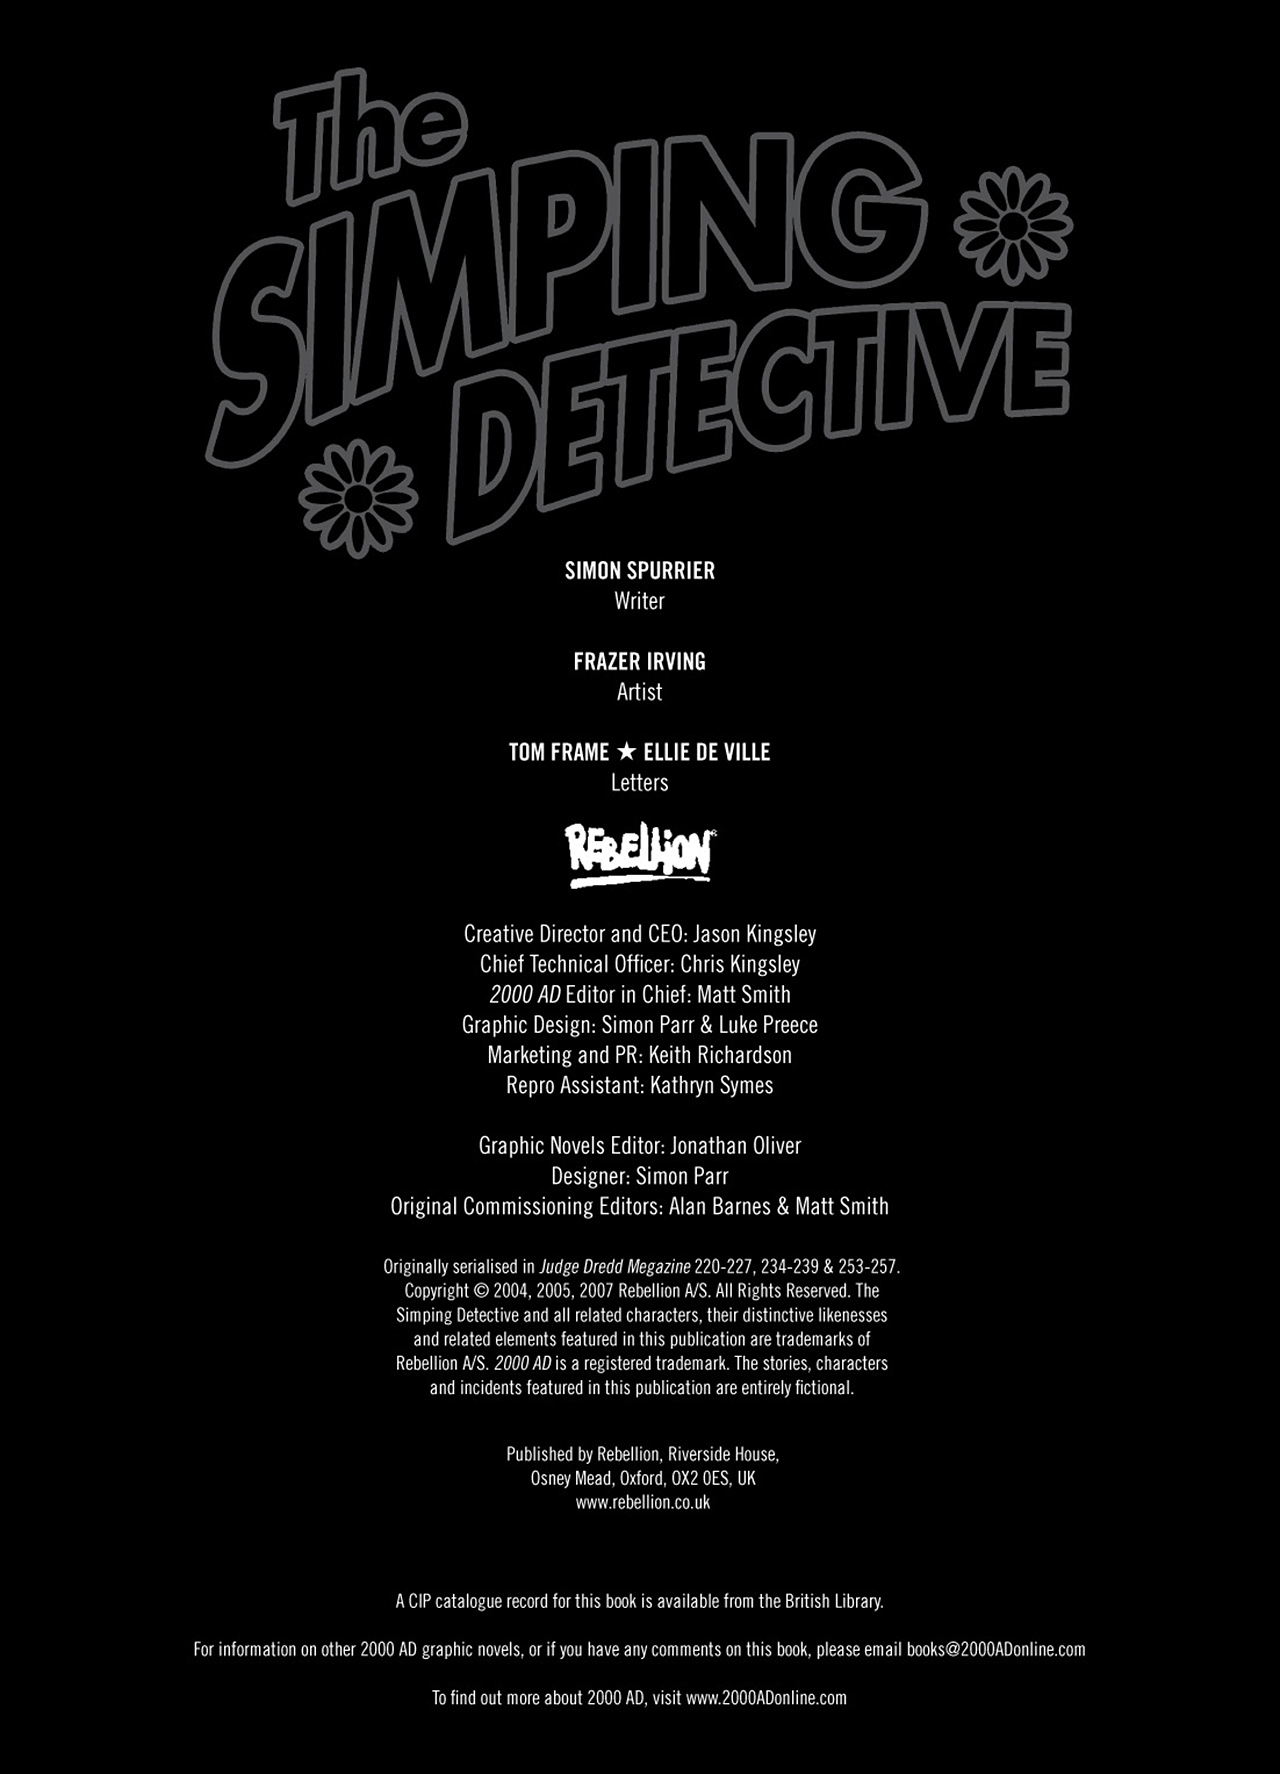 Read online The Simping Detective comic -  Issue # TPB - 4